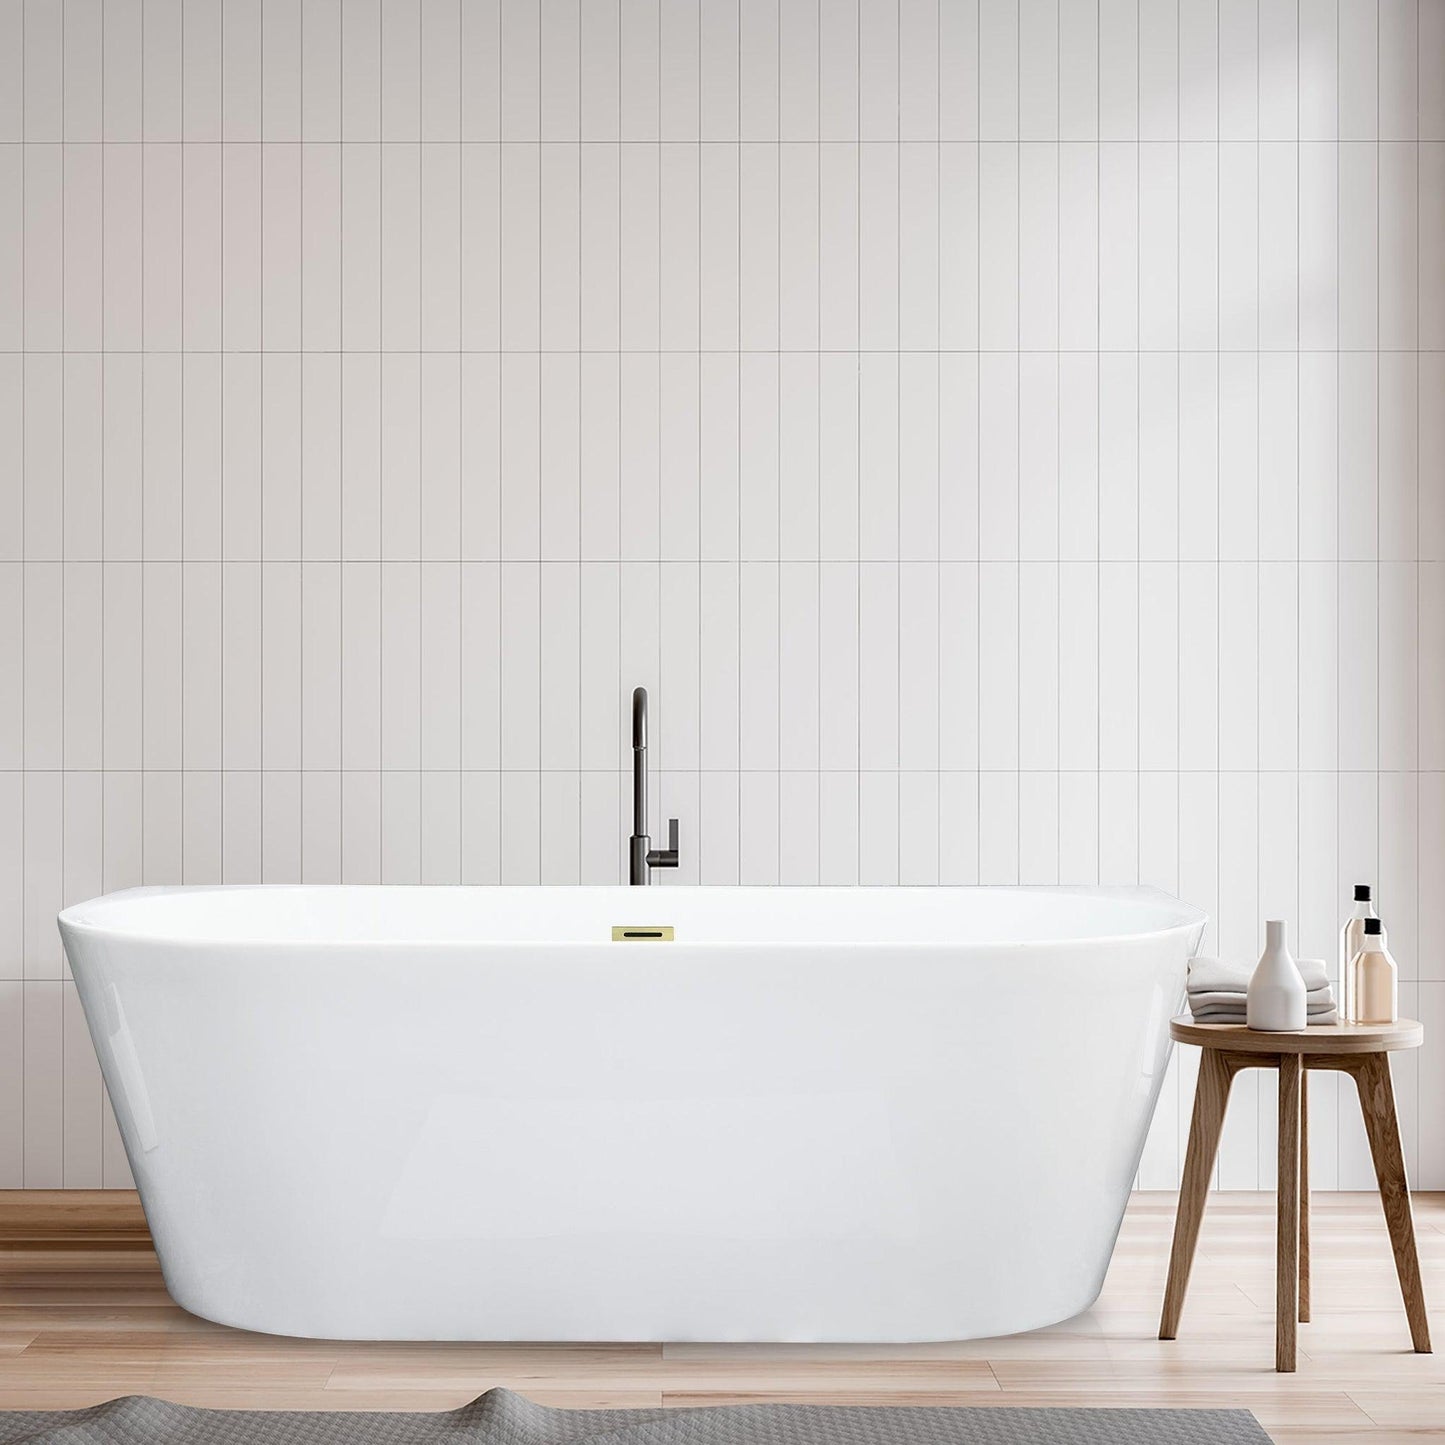 Altair Satchi 67" x 32" White Acrylic Freestanding Bathtub With Brushed Gold Drain and Overflow